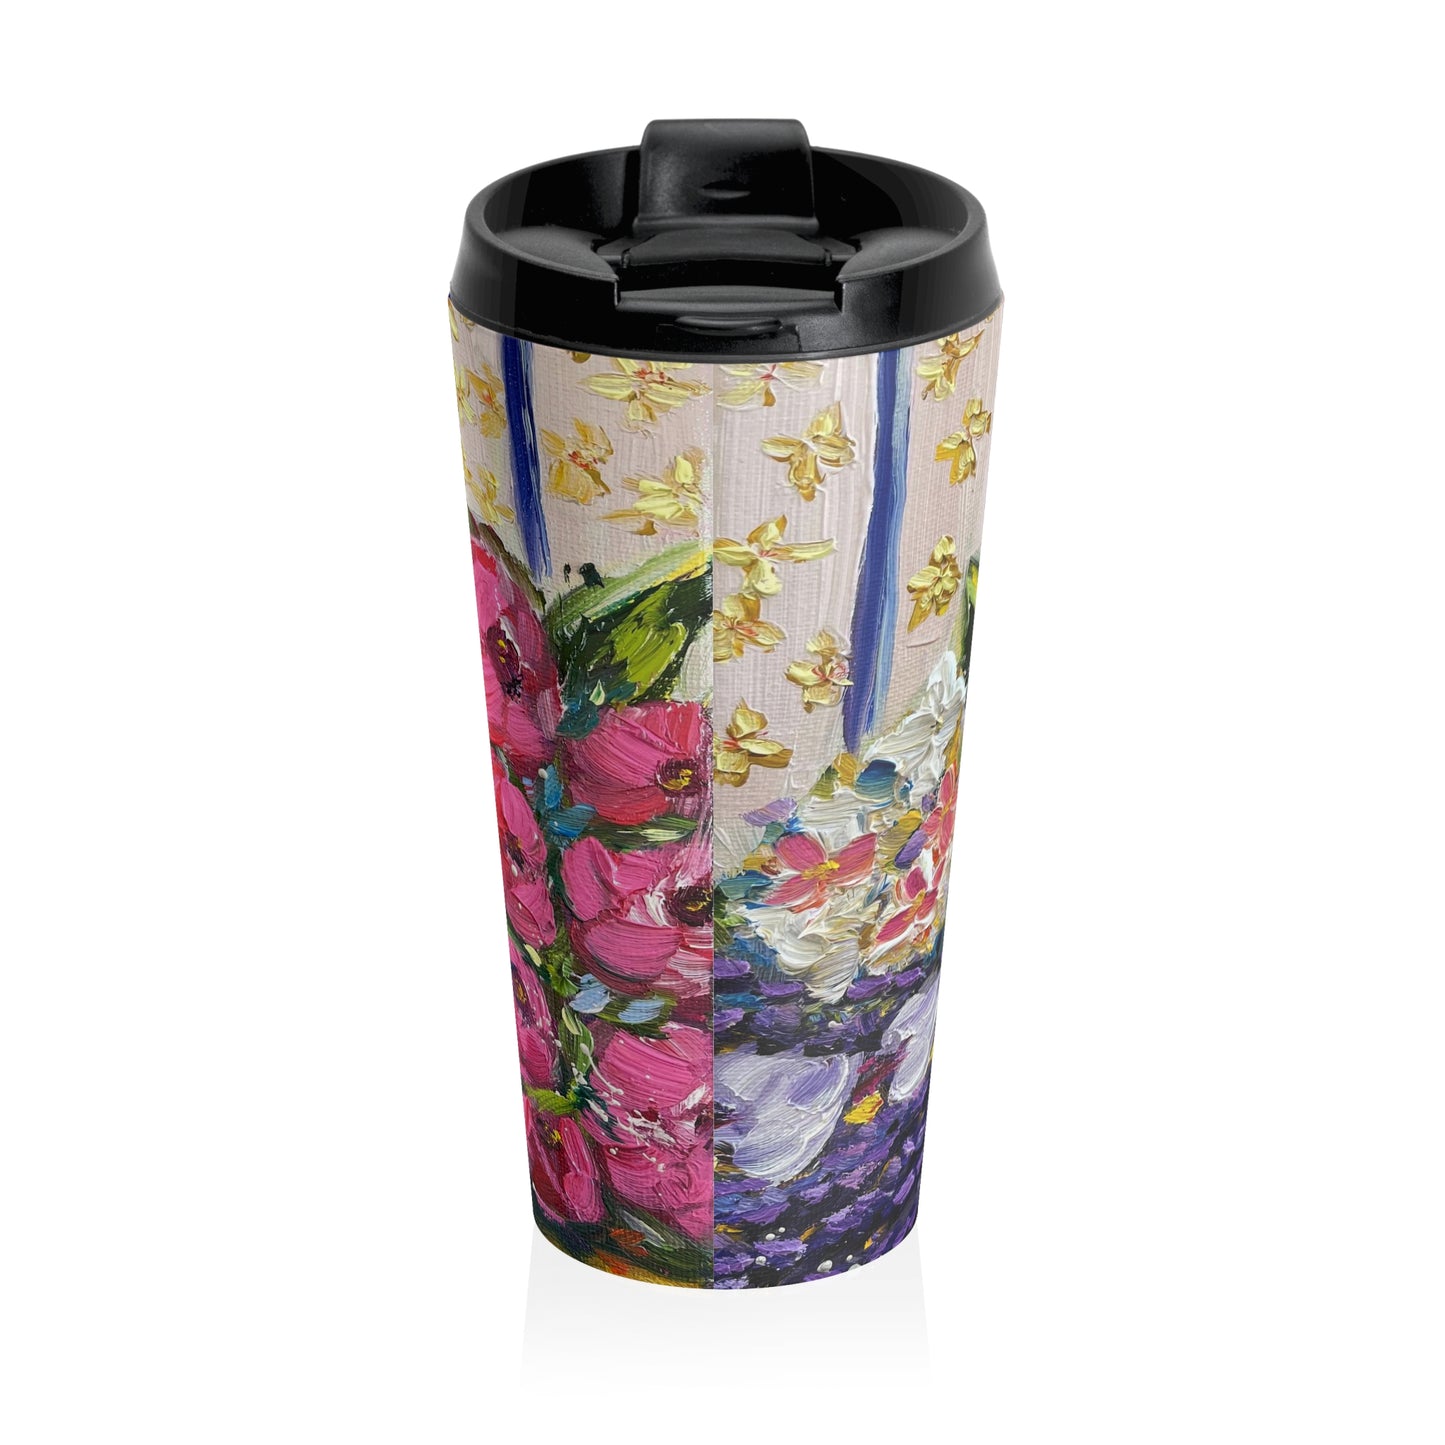 Corbeaux-Wine and Lavender- Stainless Steel Travel Mug